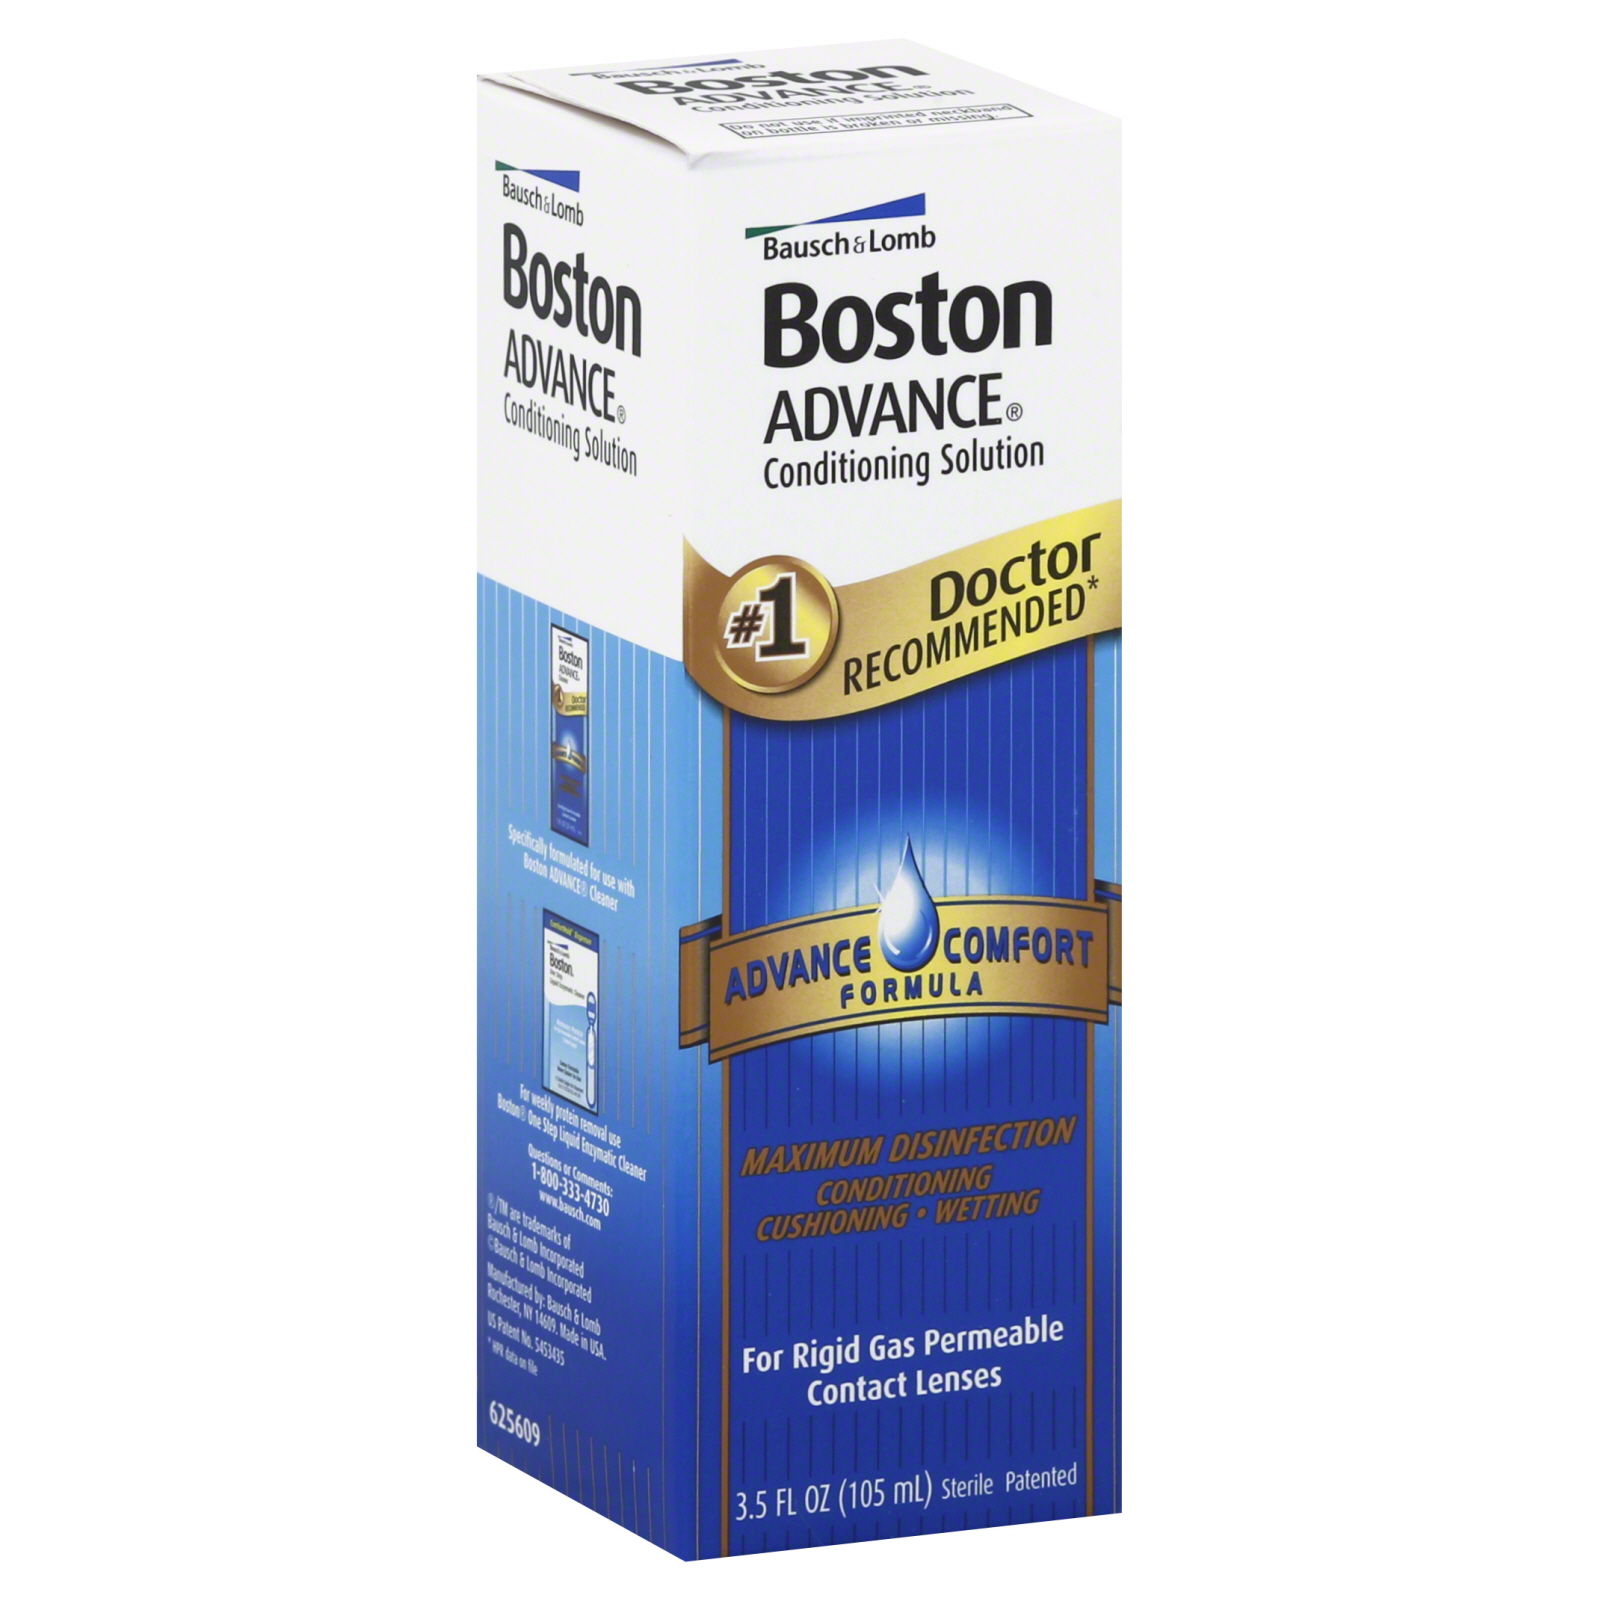 Bausch Lomb Boston Advance Conditioning Solution. 3.5 fl